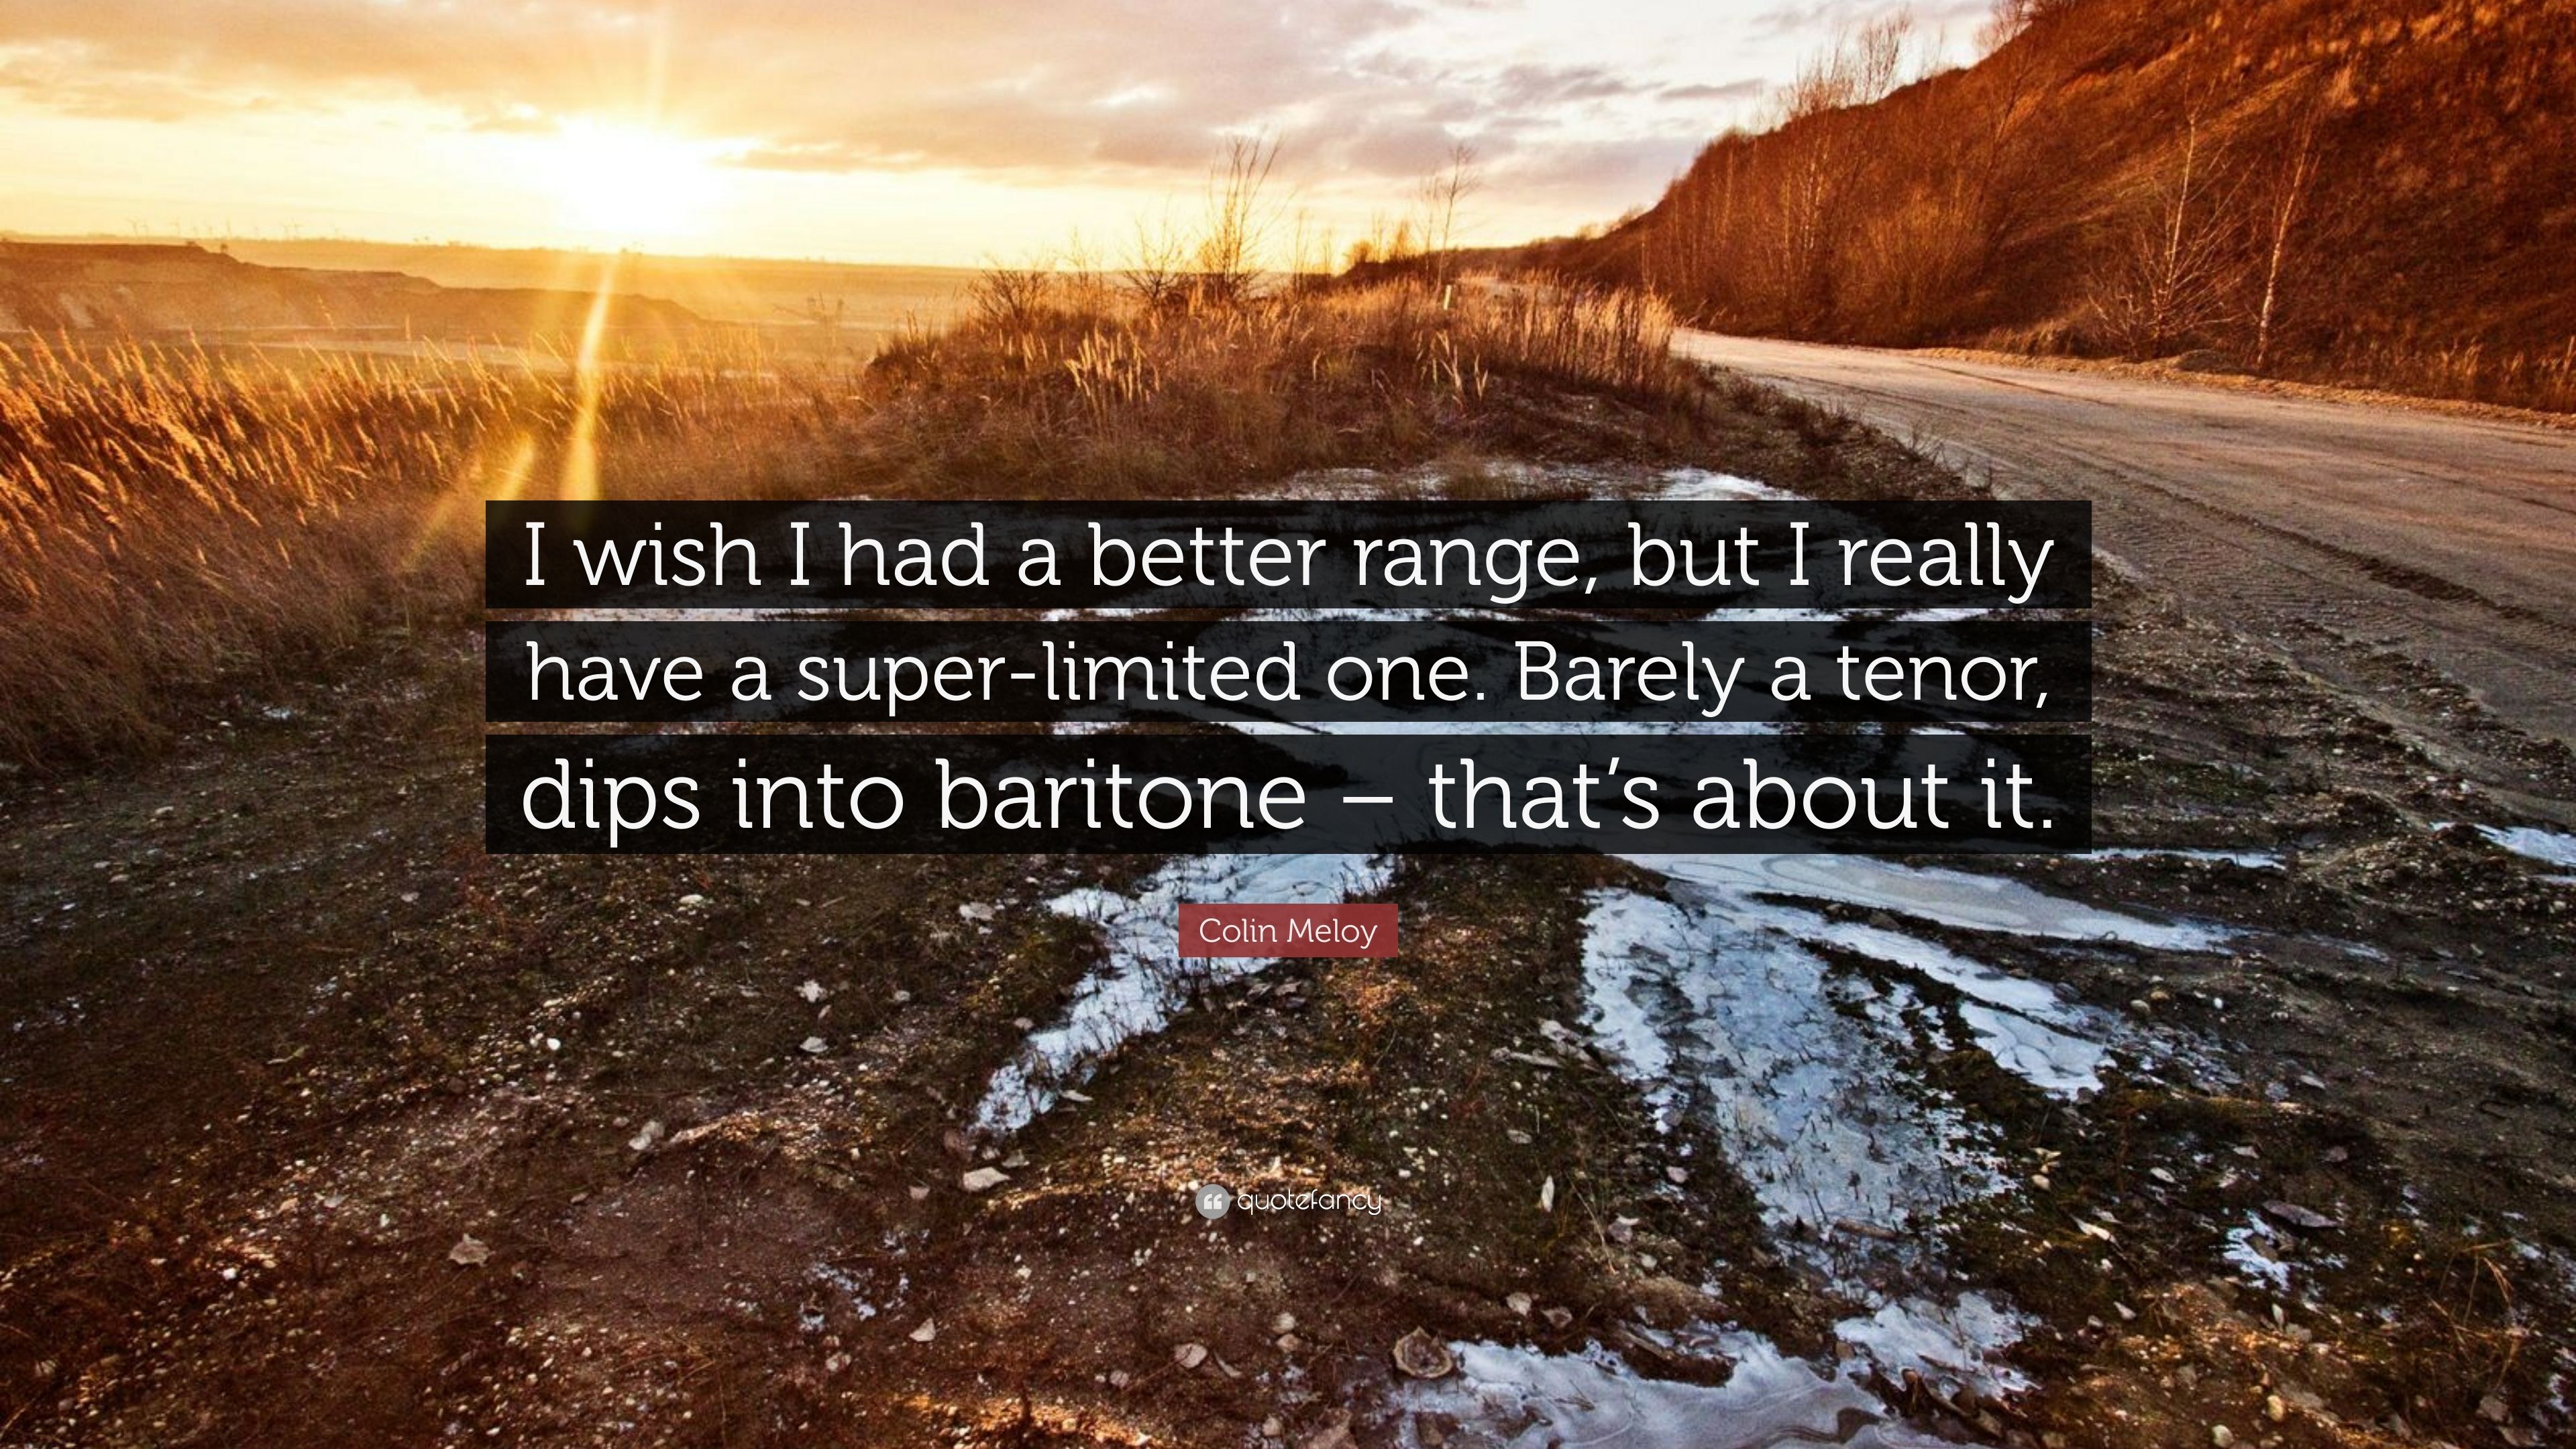 Colin Meloy Quote: “I wish I had a better range, but I really have a